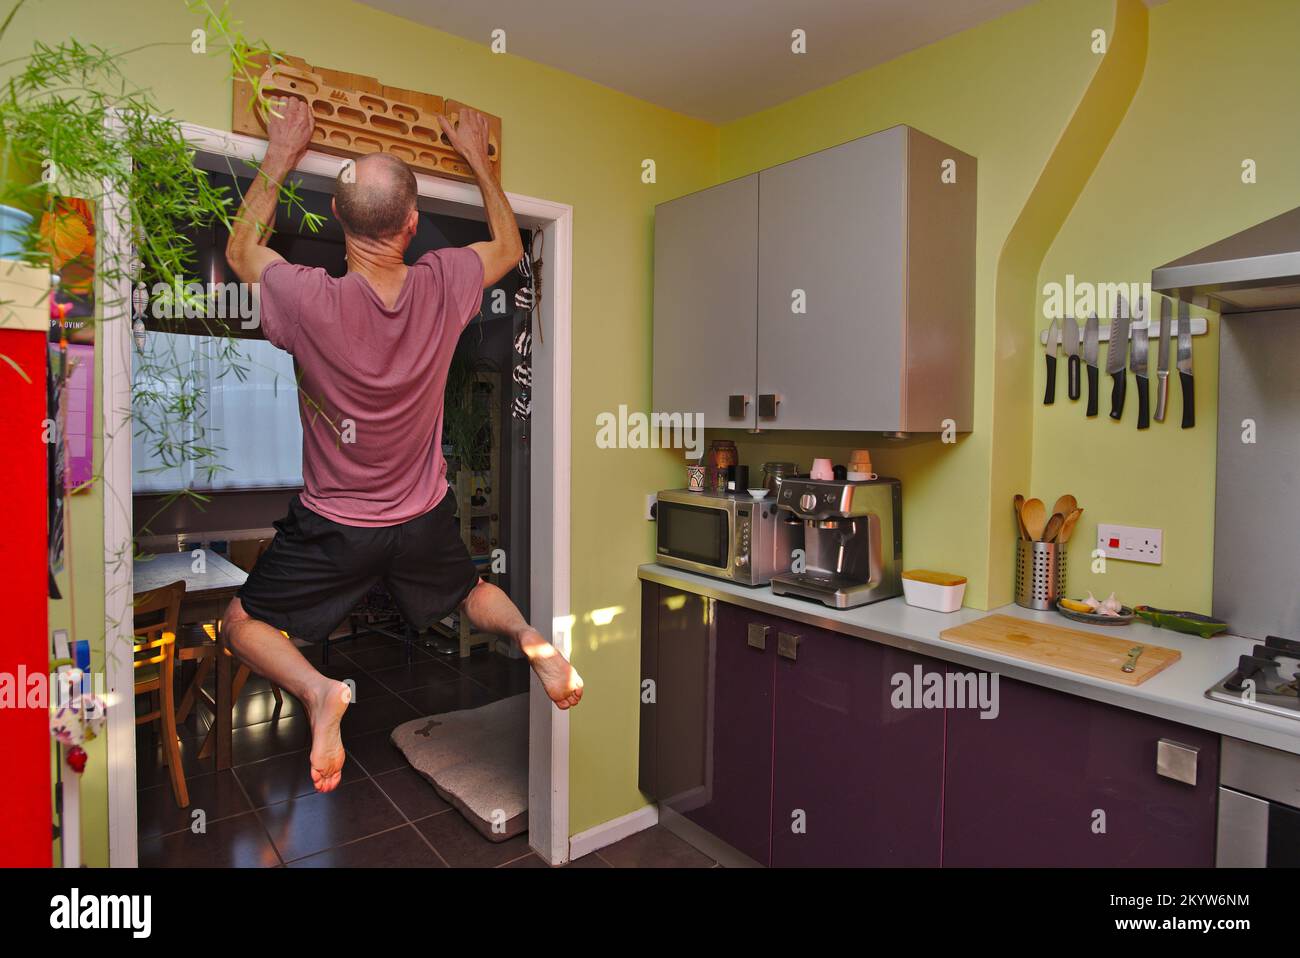 Climber strength training at home using a fingerboard in his kitchen. Stock Photo